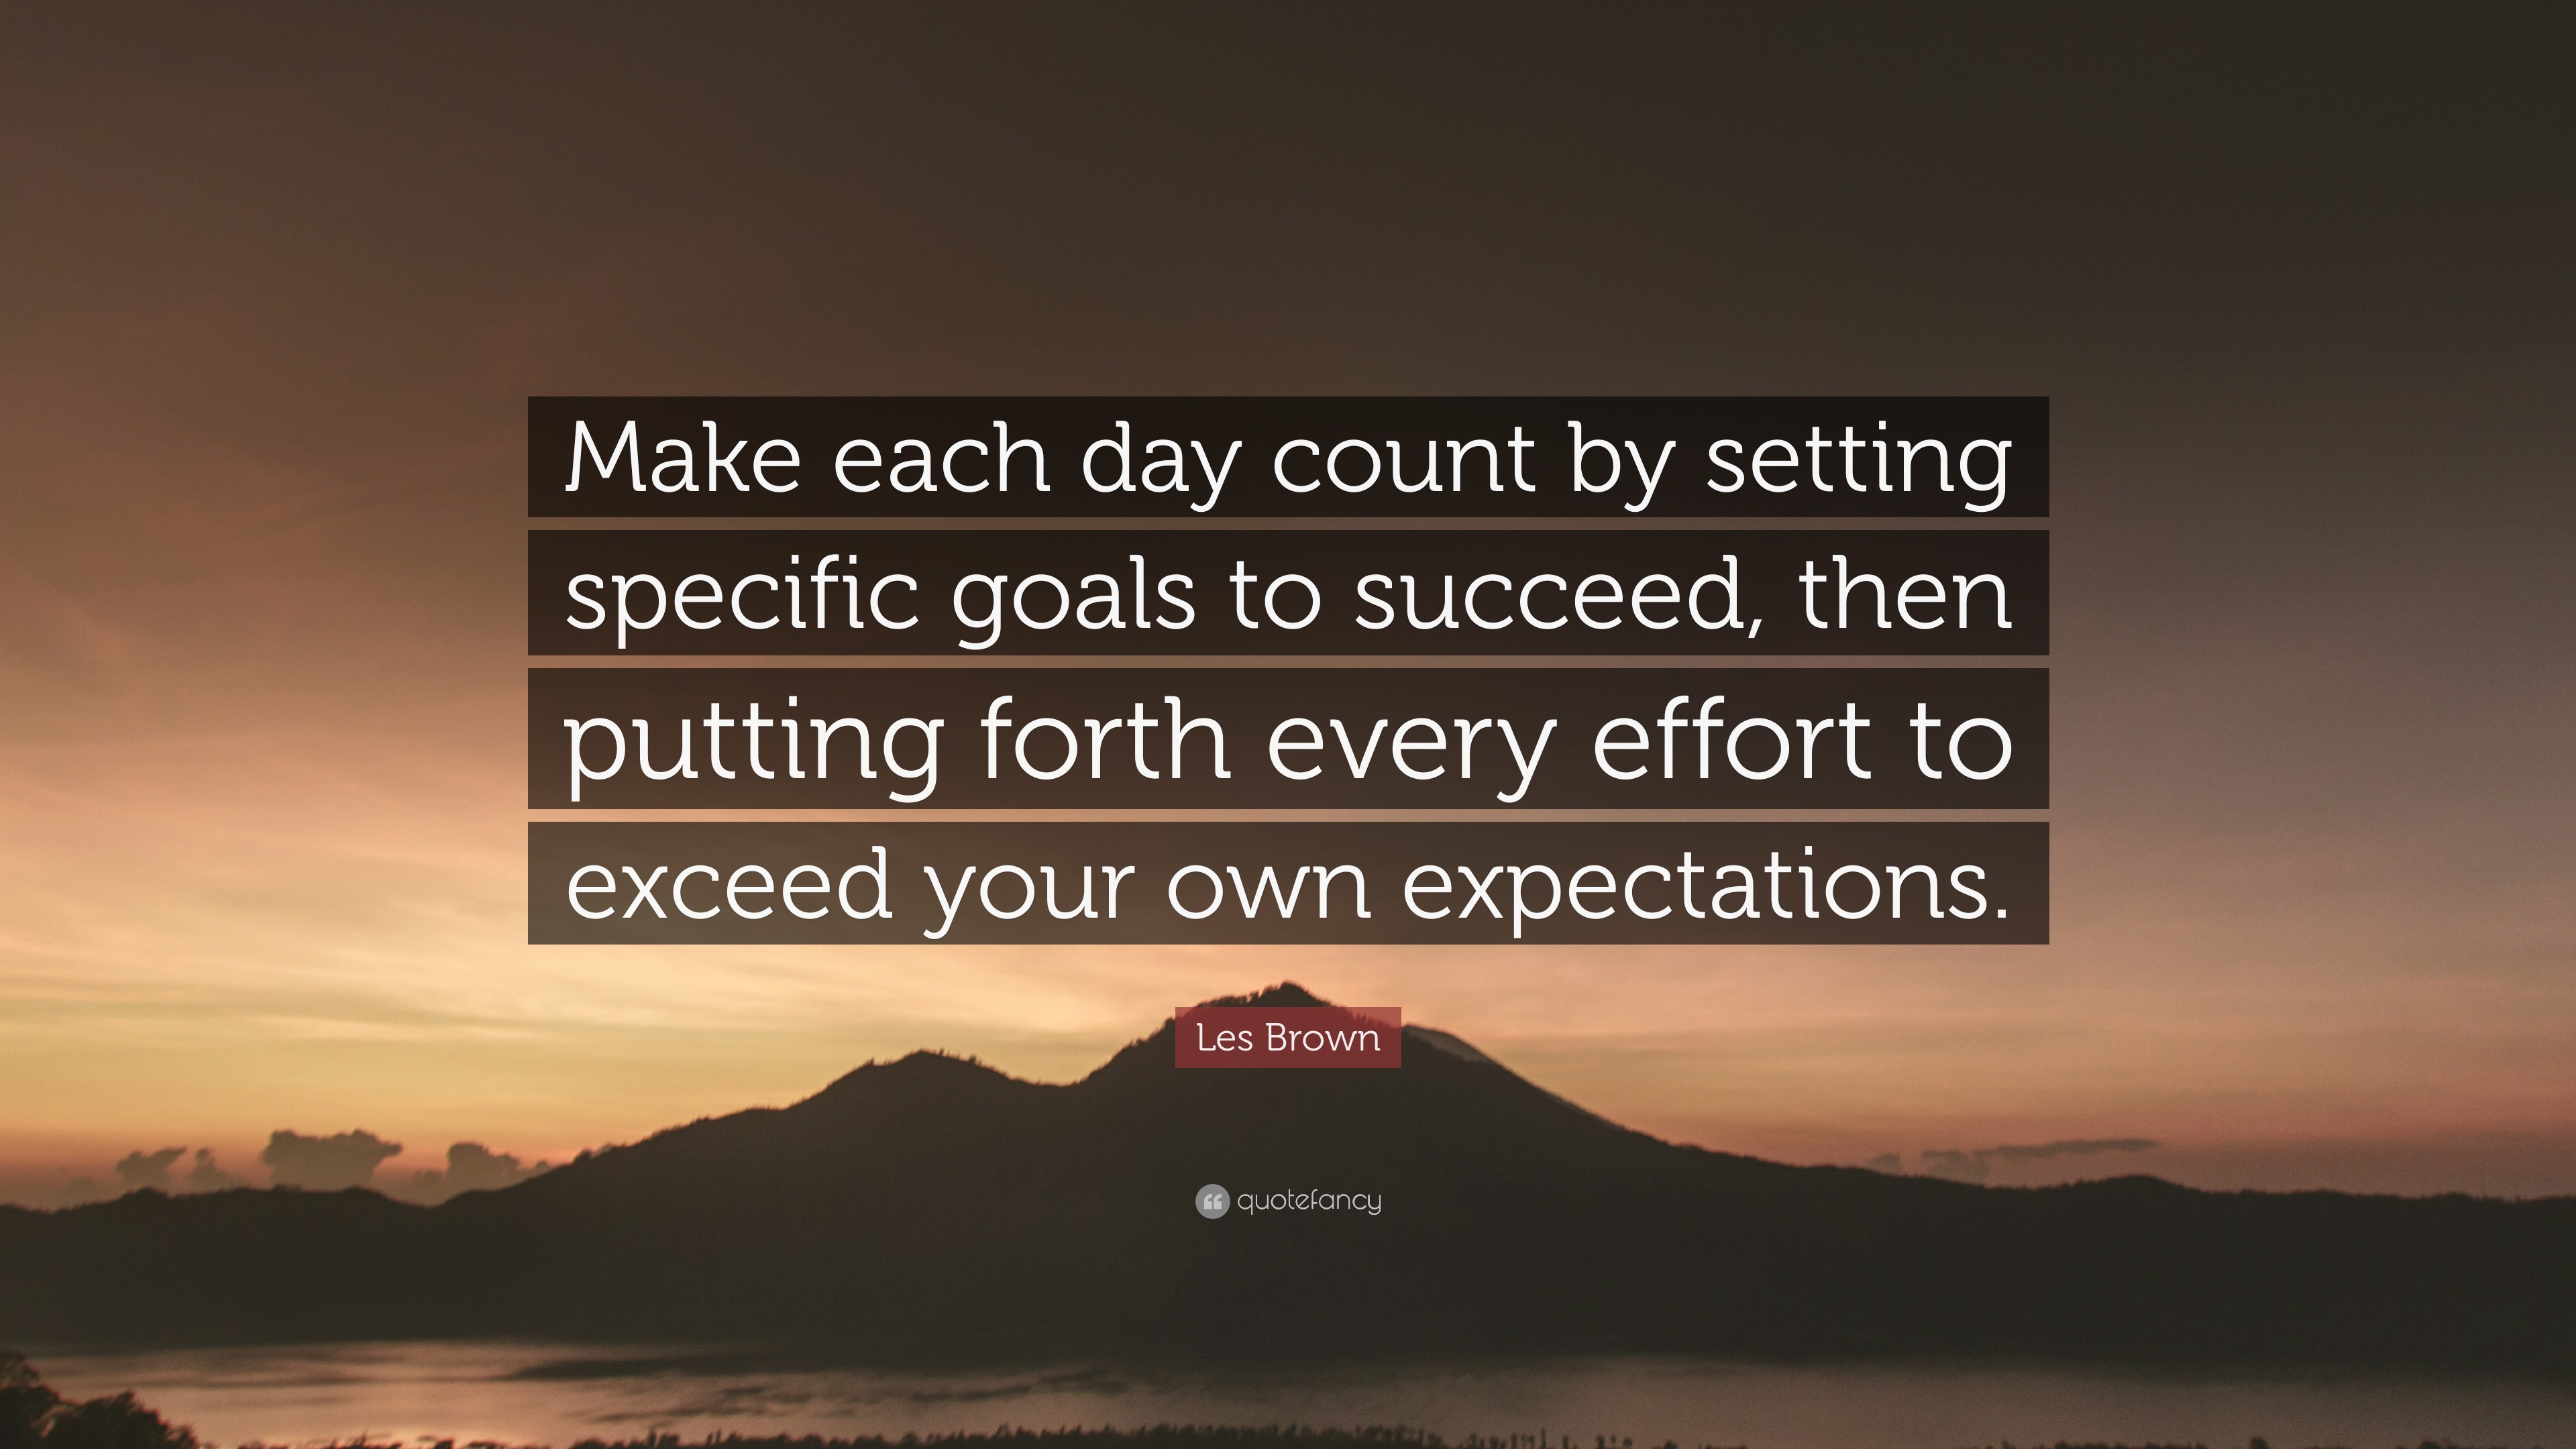 Les Brown Quote: “Make each day count by setting specific goals to